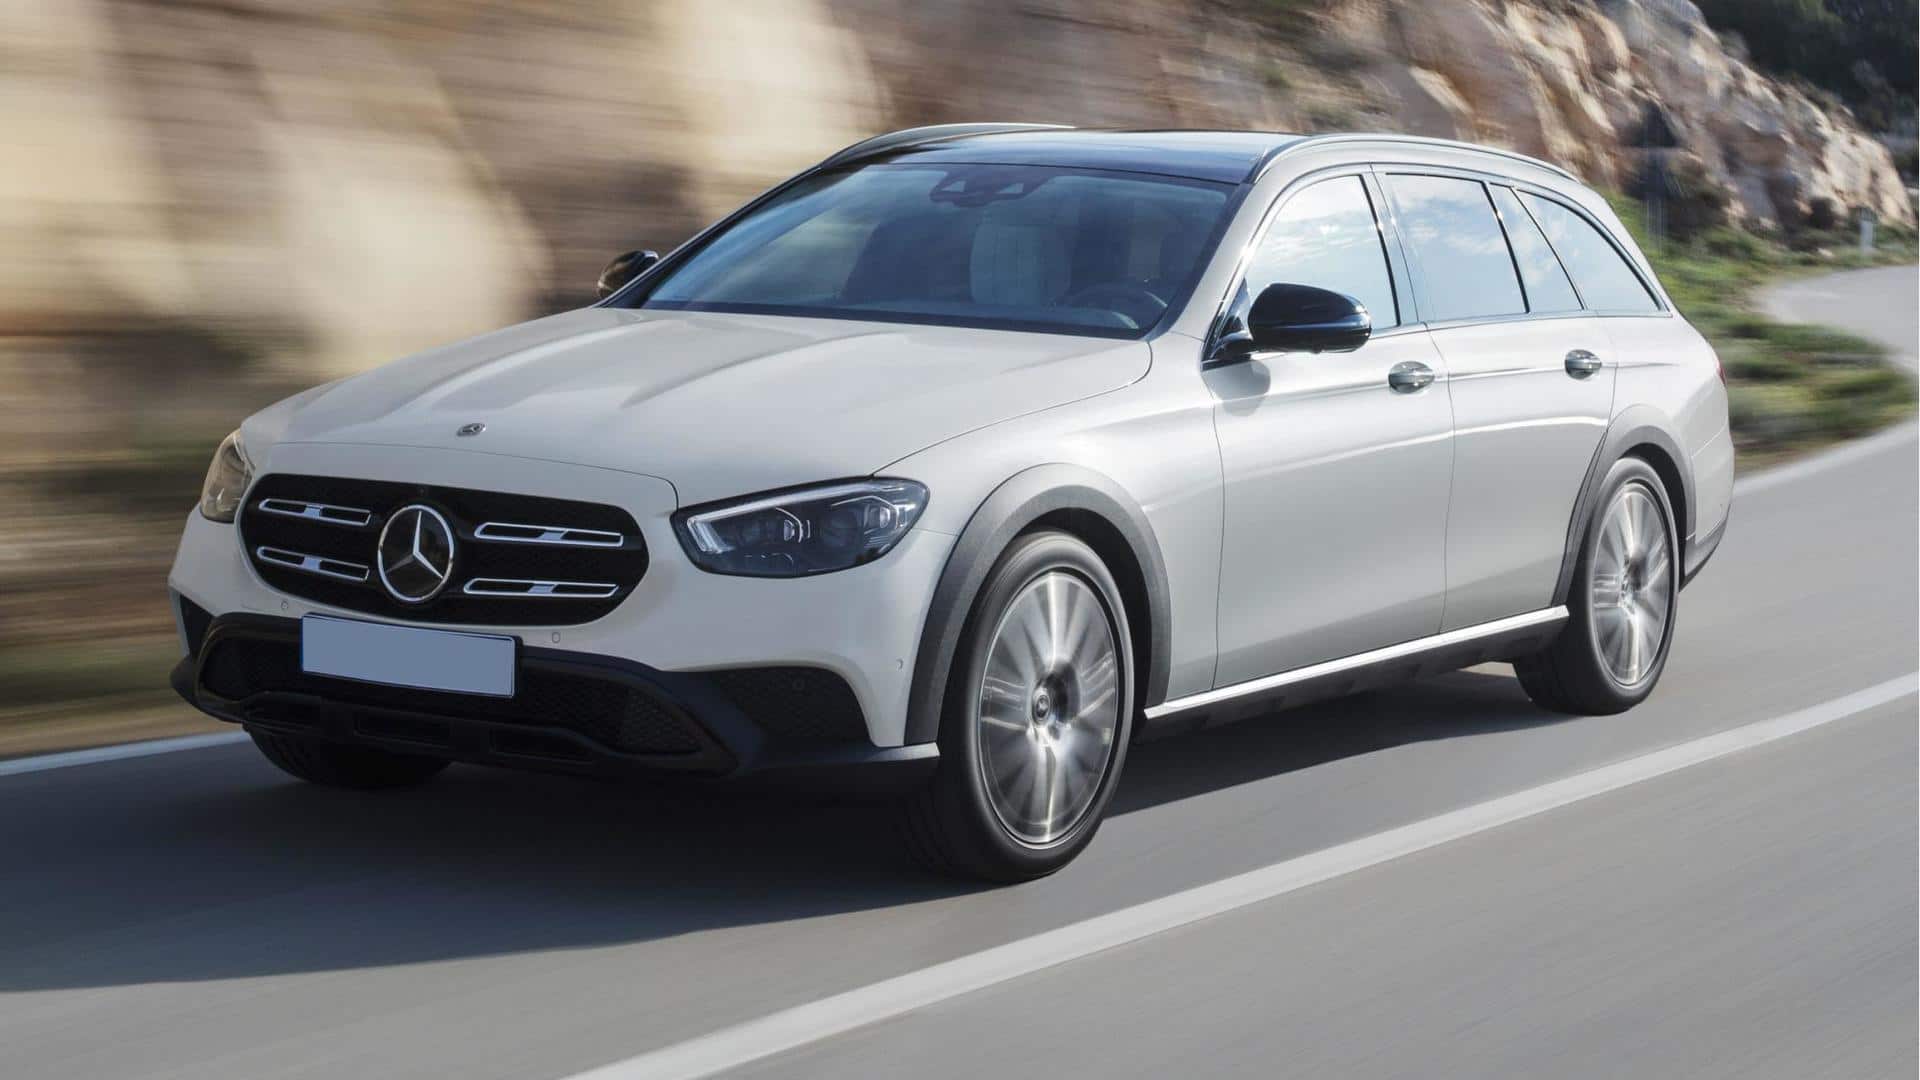 New-generation Mercedes-Benz E-Class All-Terrain in the works: What to expect